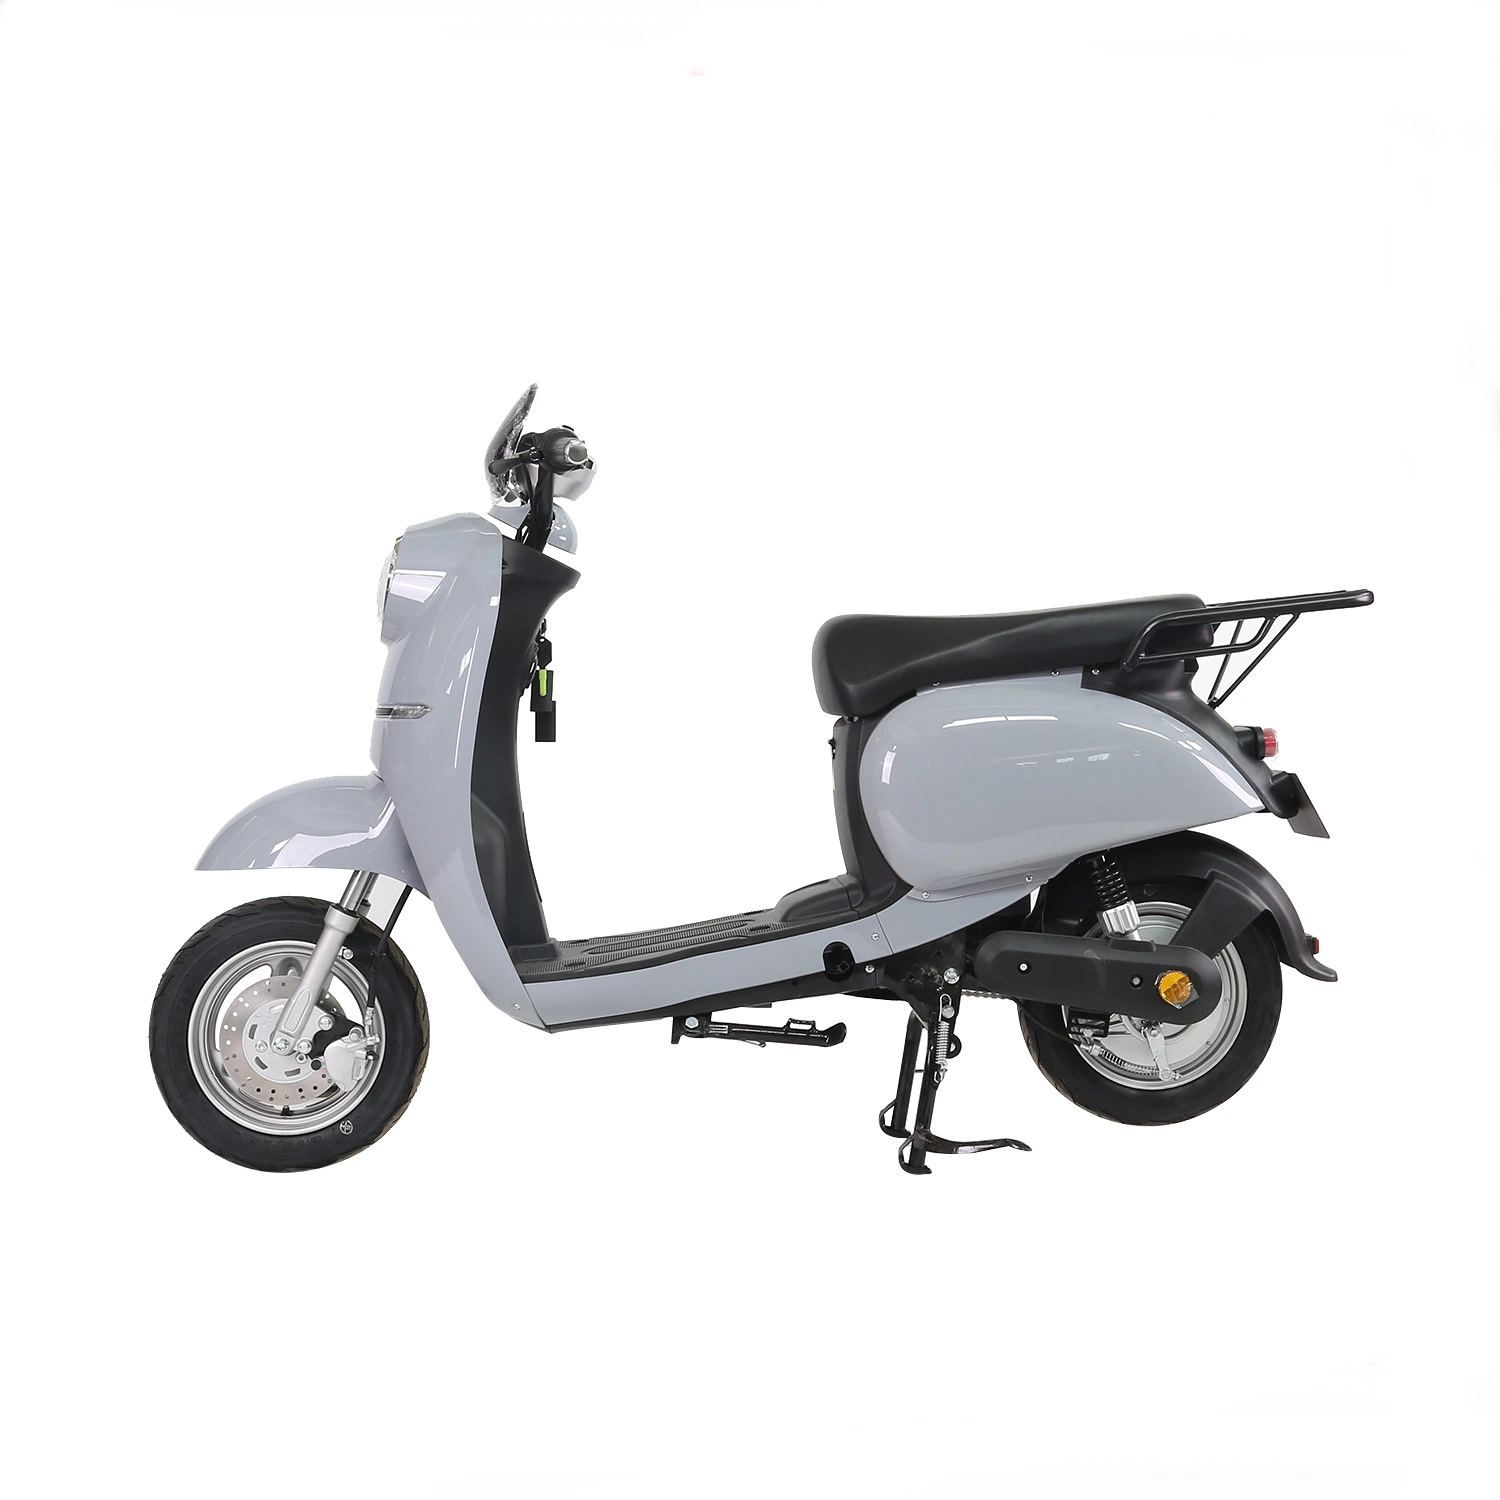 1500W Max Speed 50km/H and Max Range 90km Vespa Two Sets of 70V35ah Electric Motorcycle Control System LED Light Electric Car Spacious